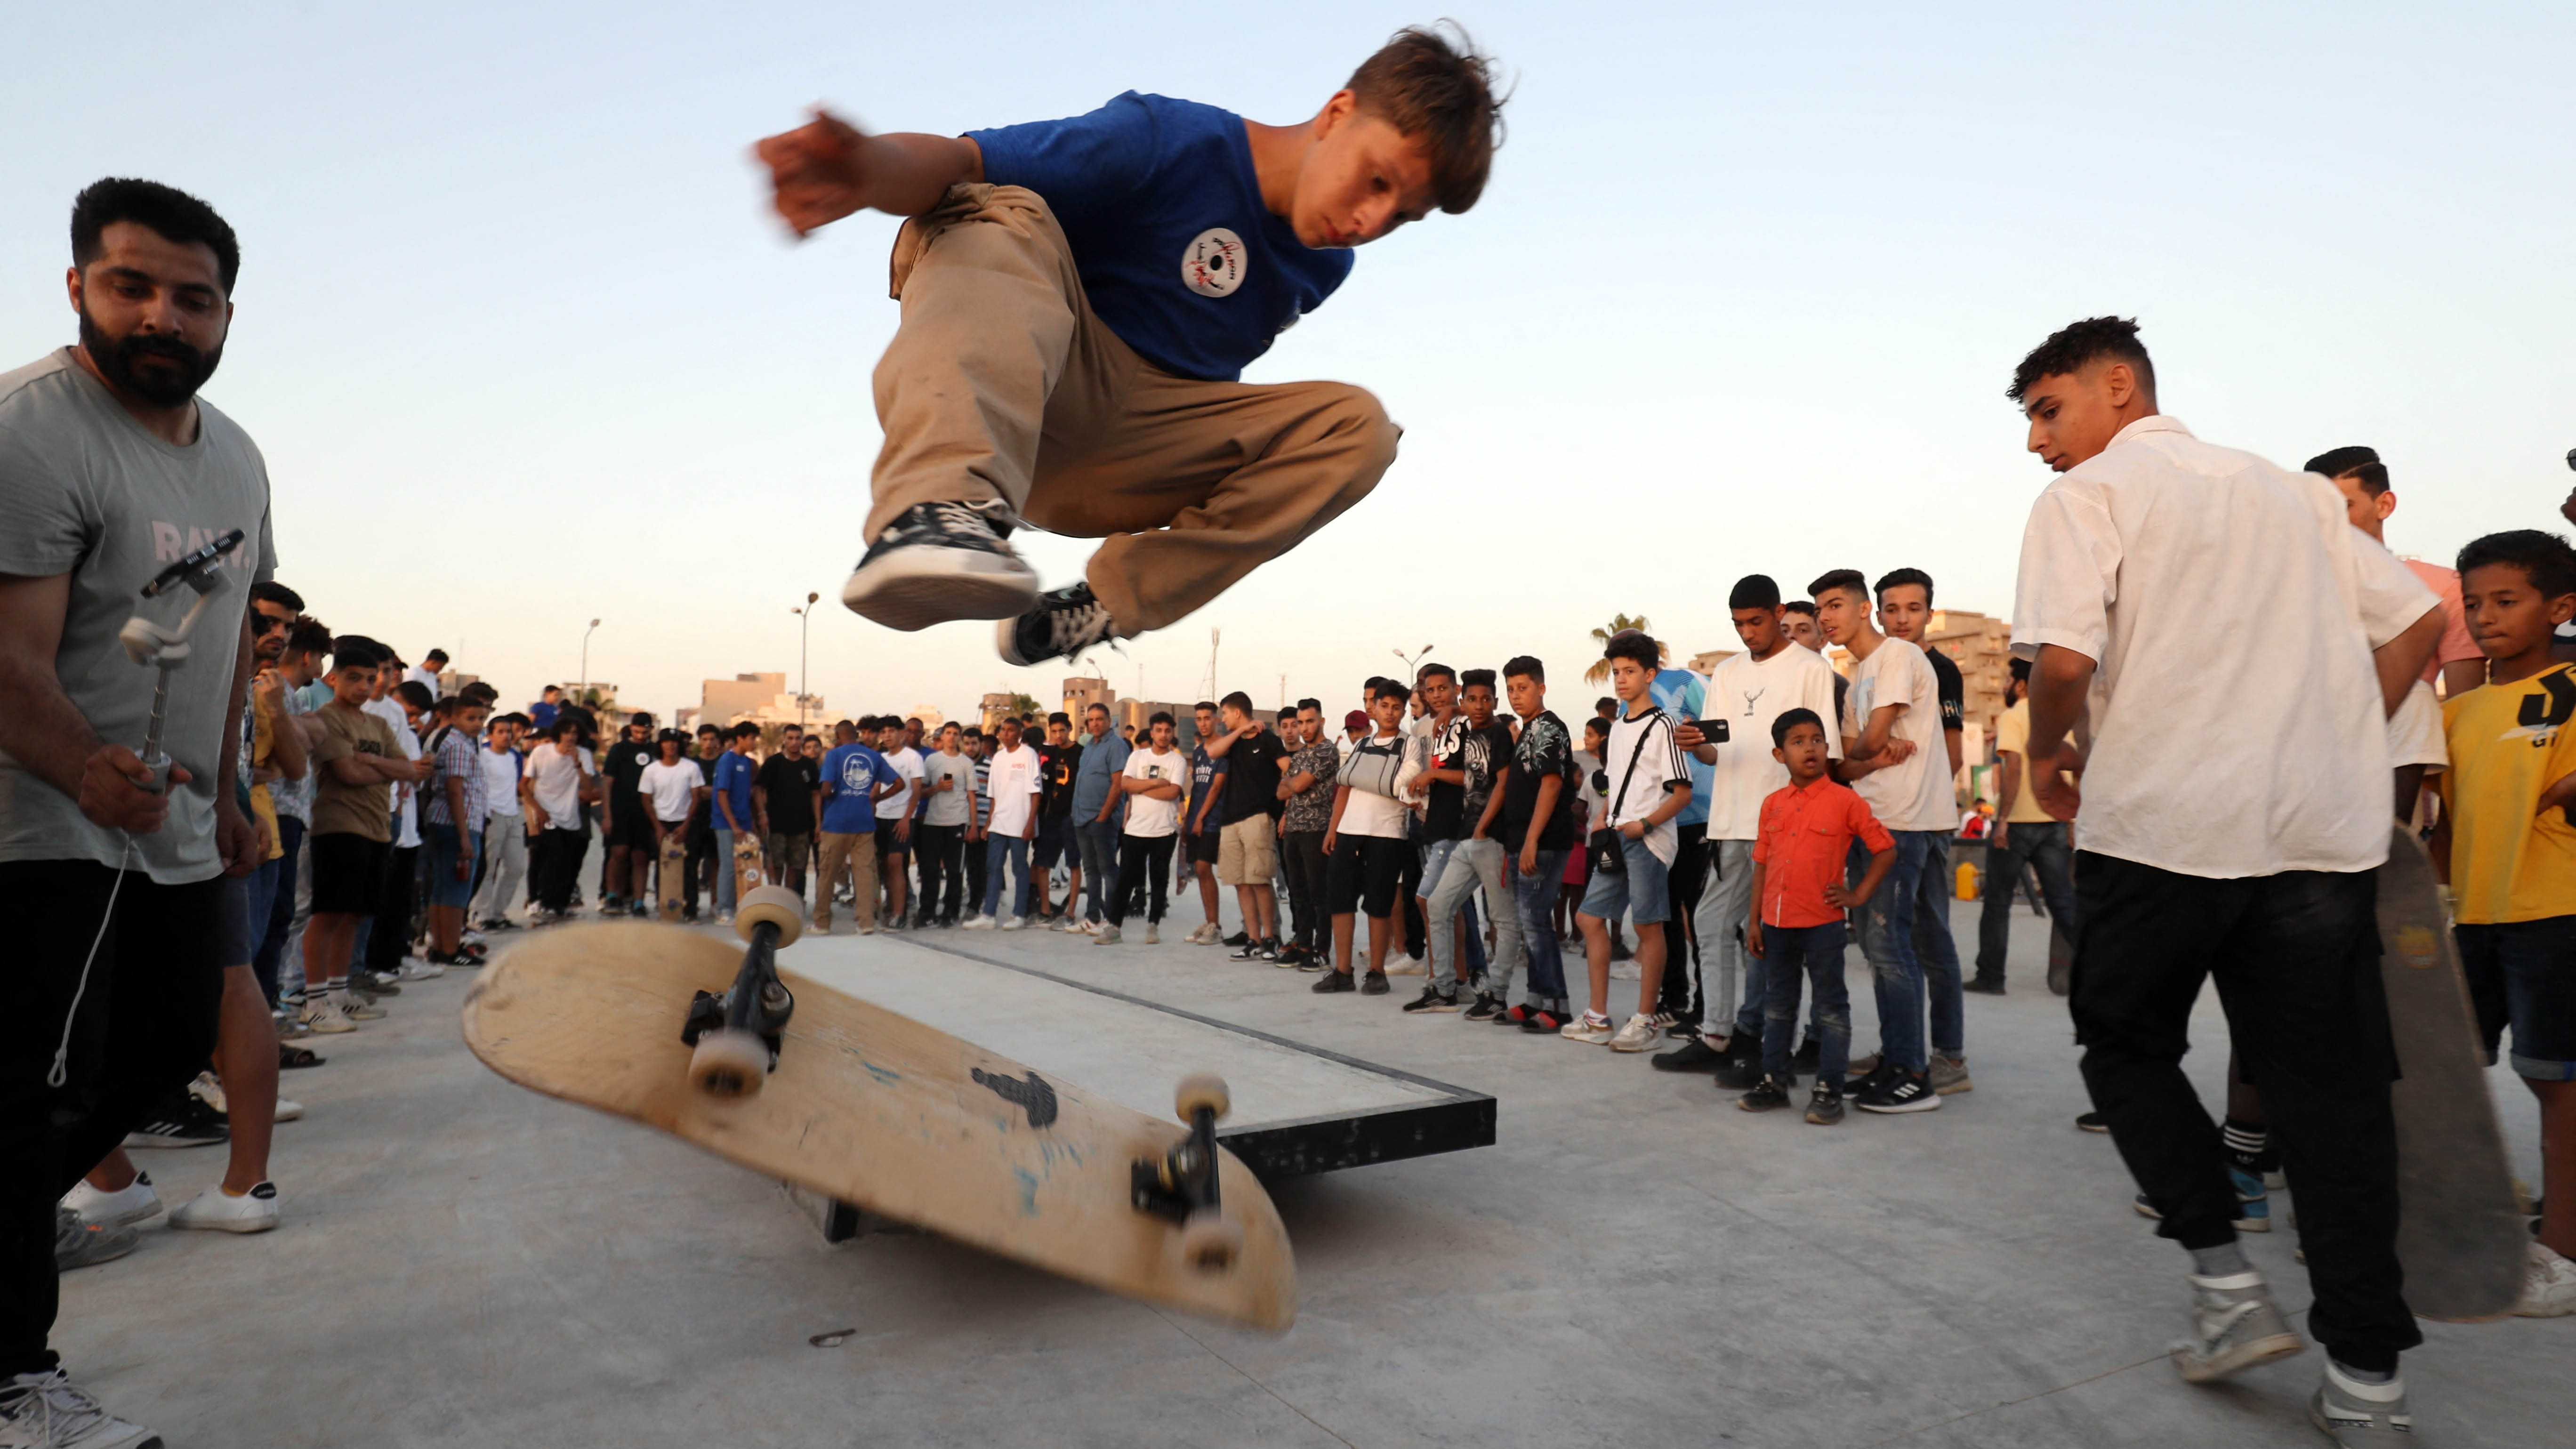 Skateboarders show off their skills during the inauguration of a skatepark, a first in Libya, in the capital Tripoli. 